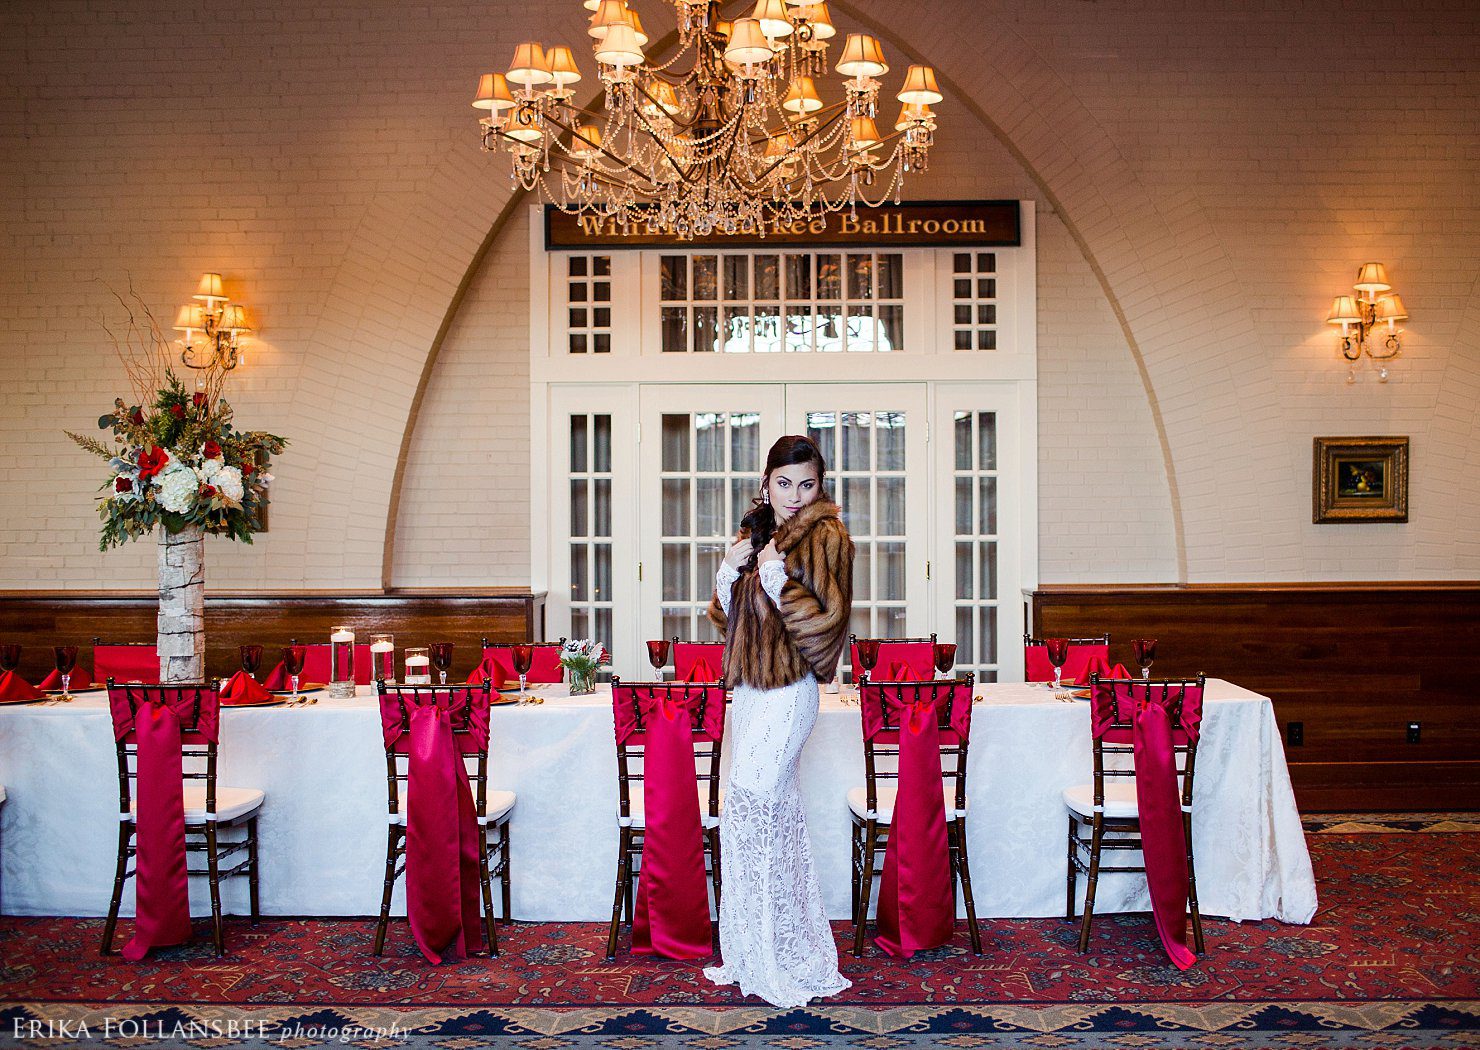 Winter wedding reception styled in red and gold for Lakes Region Bride magazine